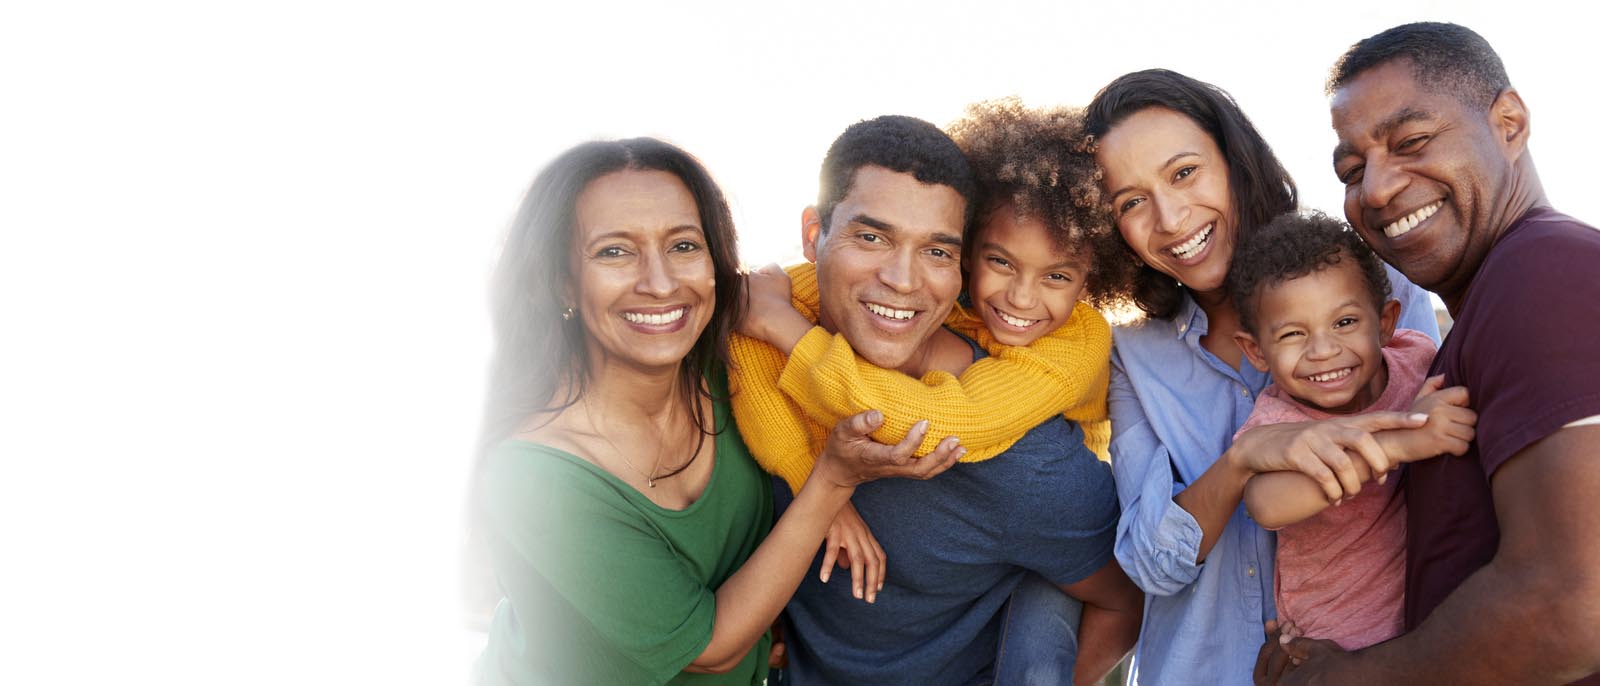 Smiling and happy multicultural families with children.